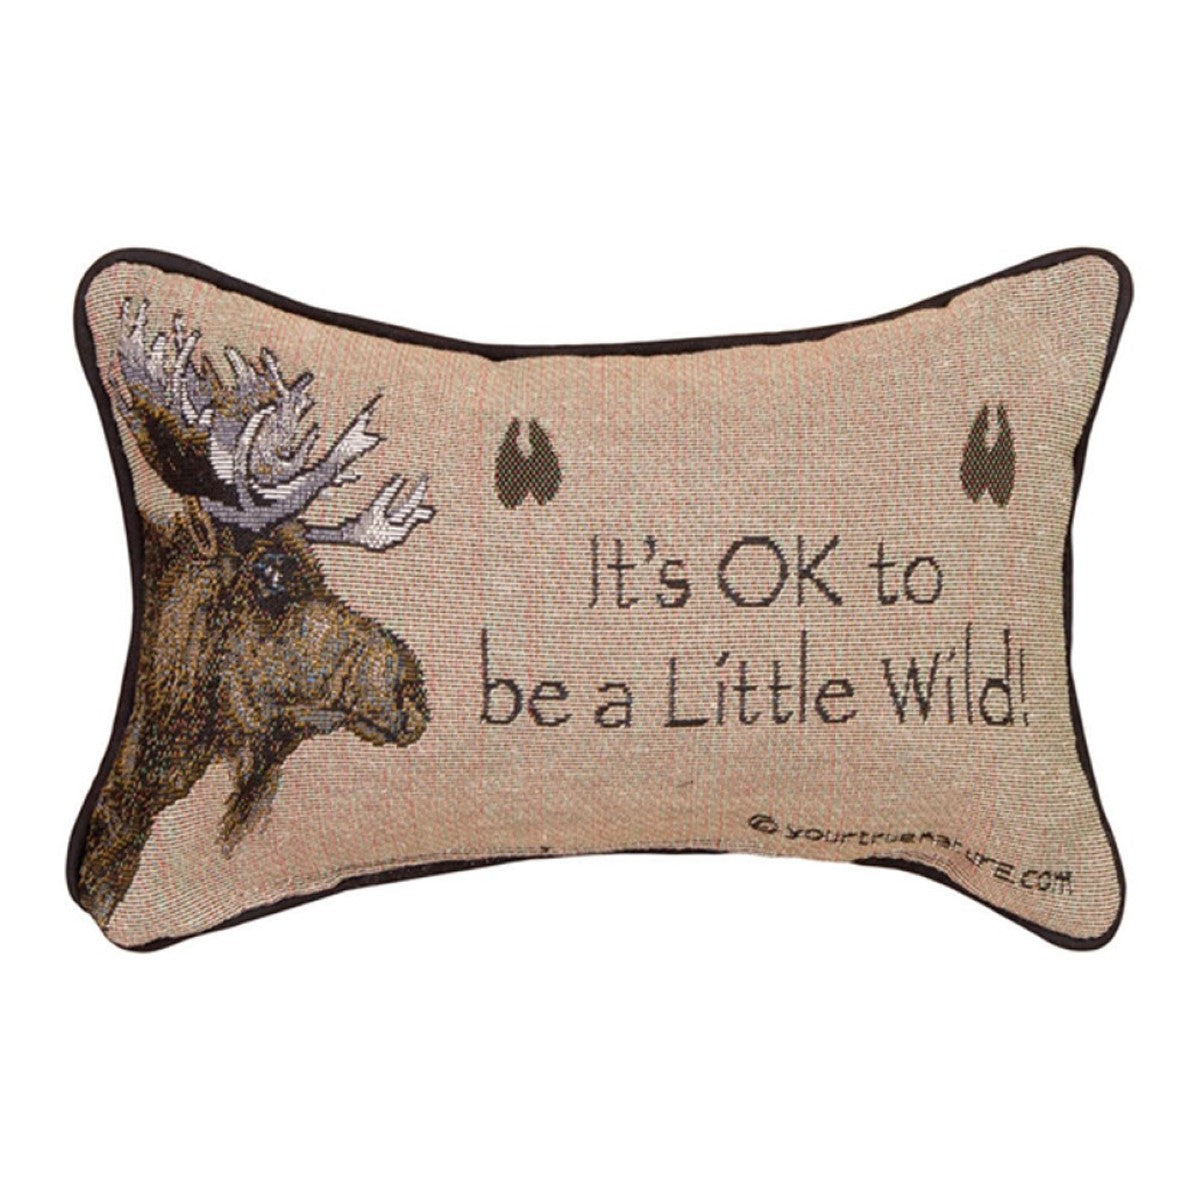 Advice From A Moose Word Pillow By Your True Nature